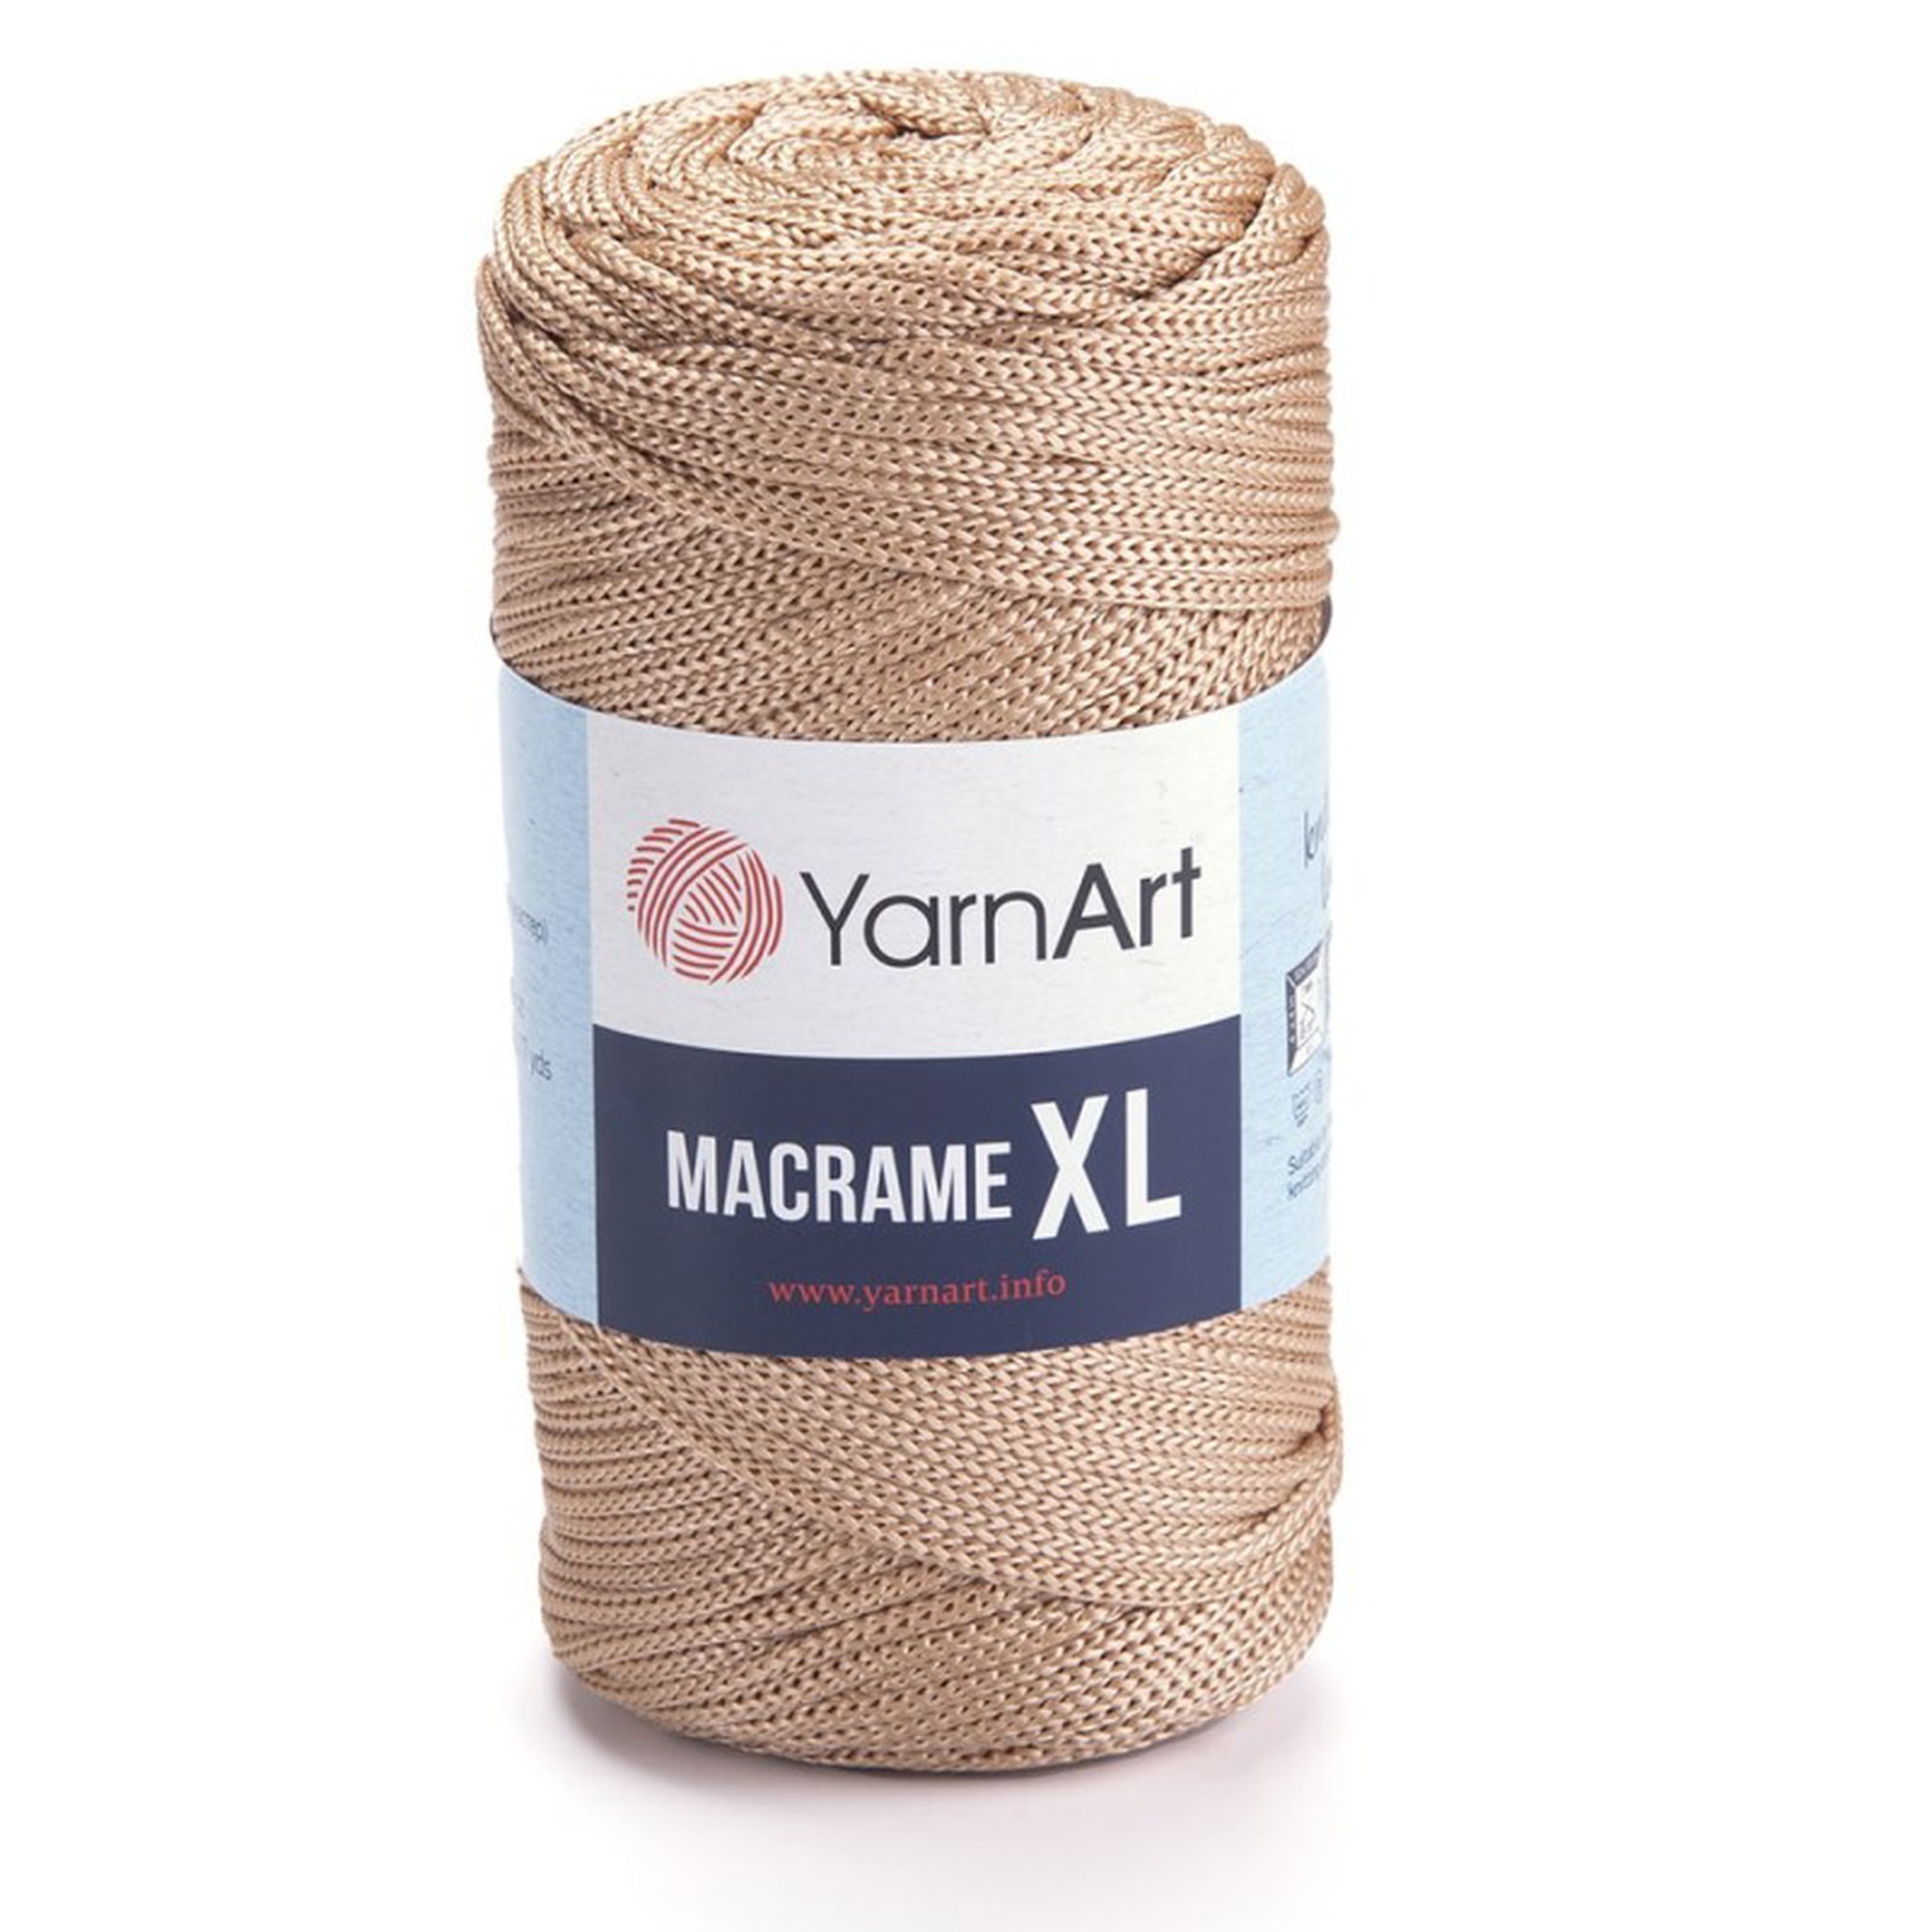 4mm Bonnie Macrame Cord, 100 Yd Lengths Multiple Colors, Craft Cord,  Knitting Rope, Crocheting Yarn for Macramé, Weaving and Knotting Crafts 